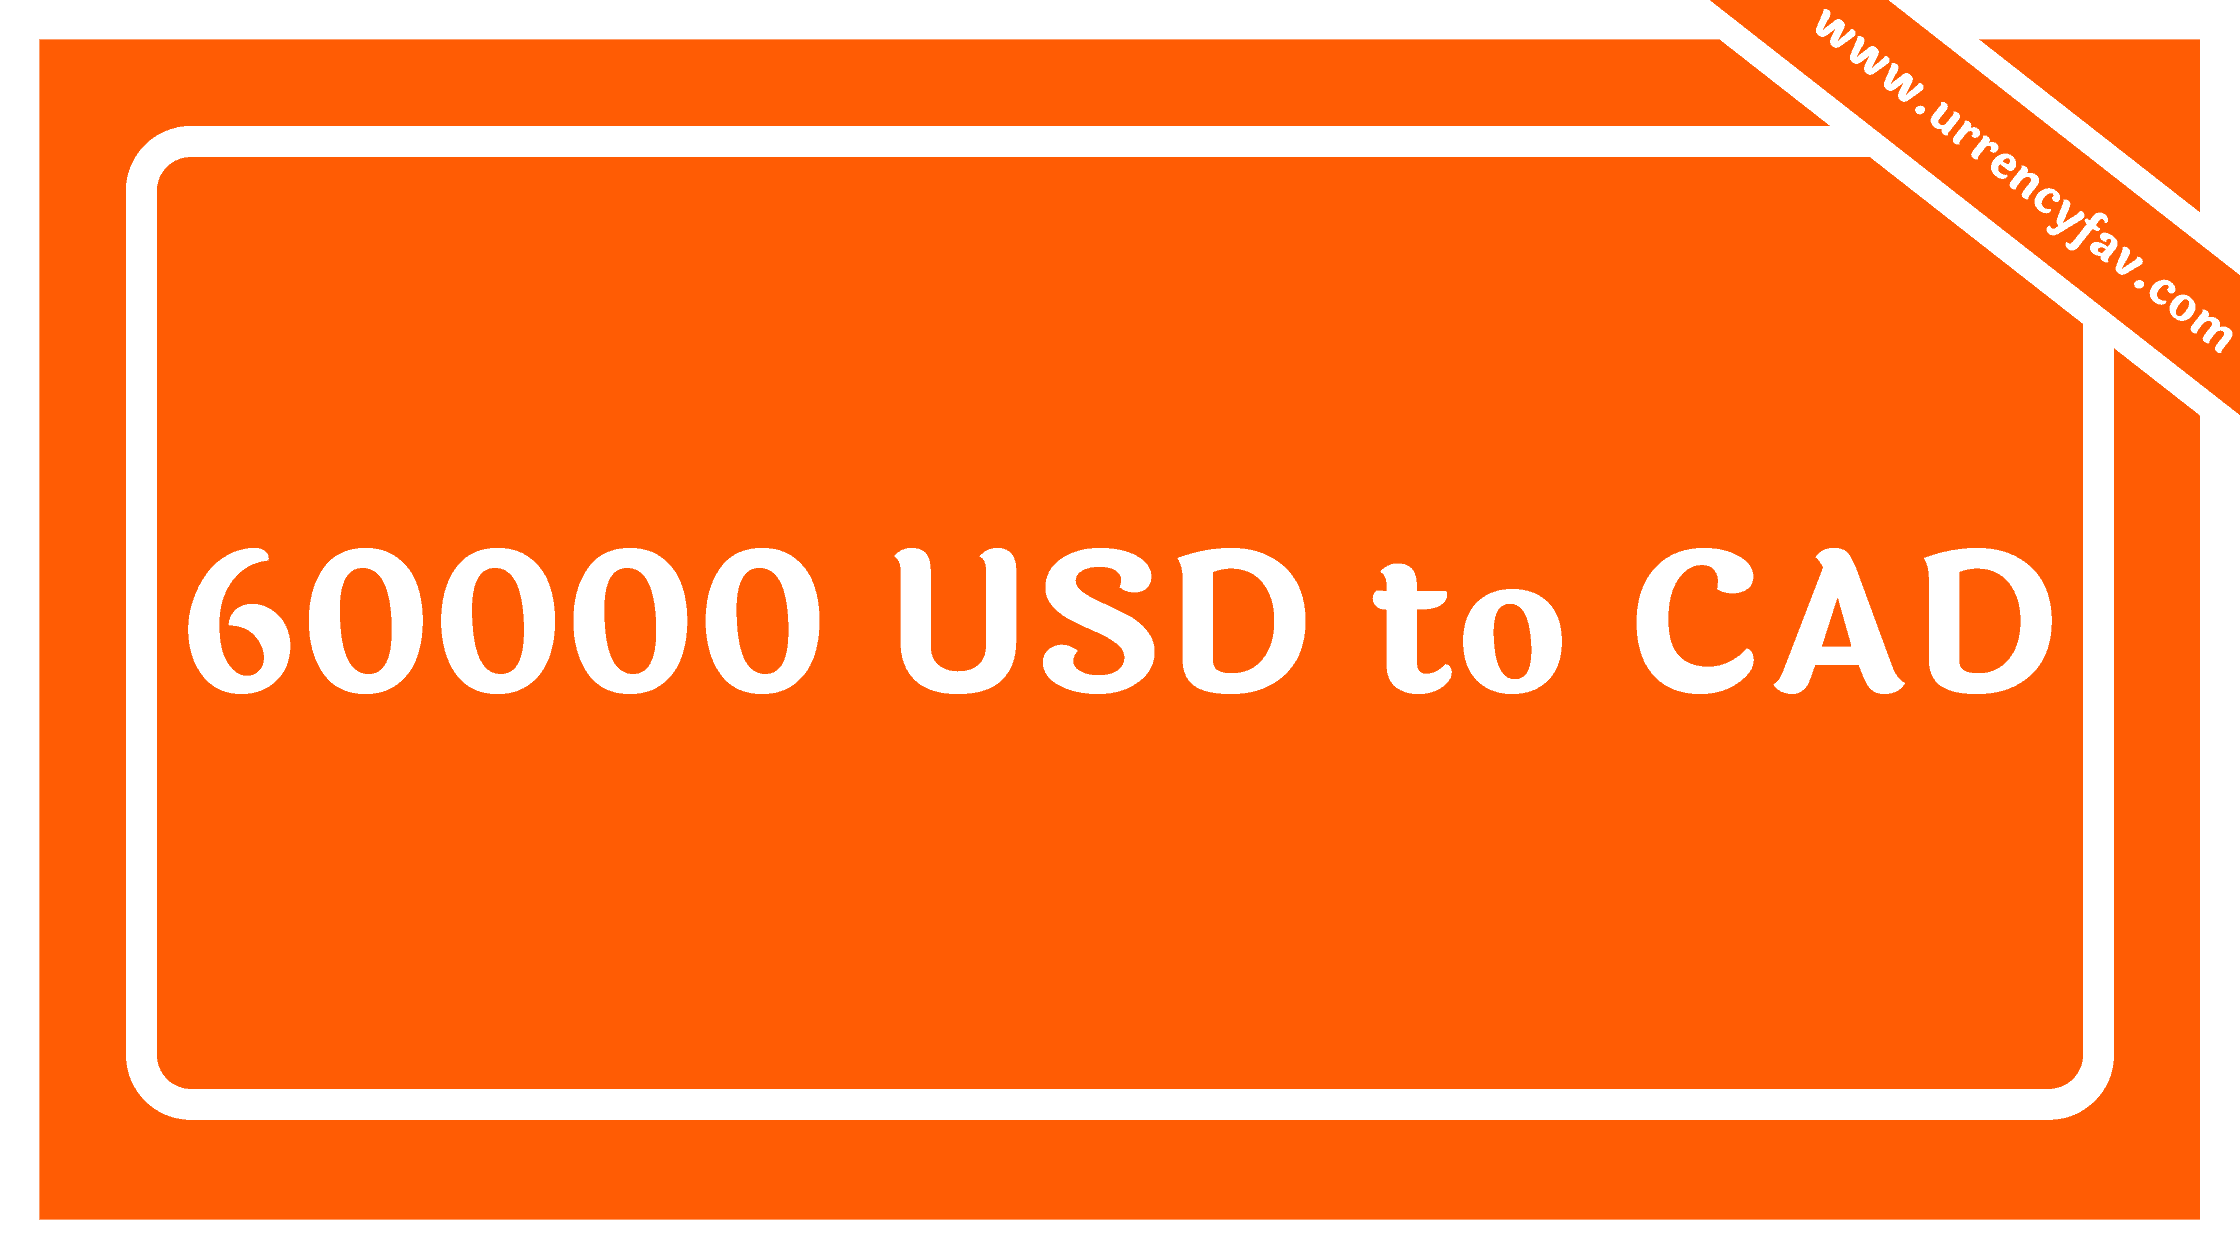 60000 USD to CAD